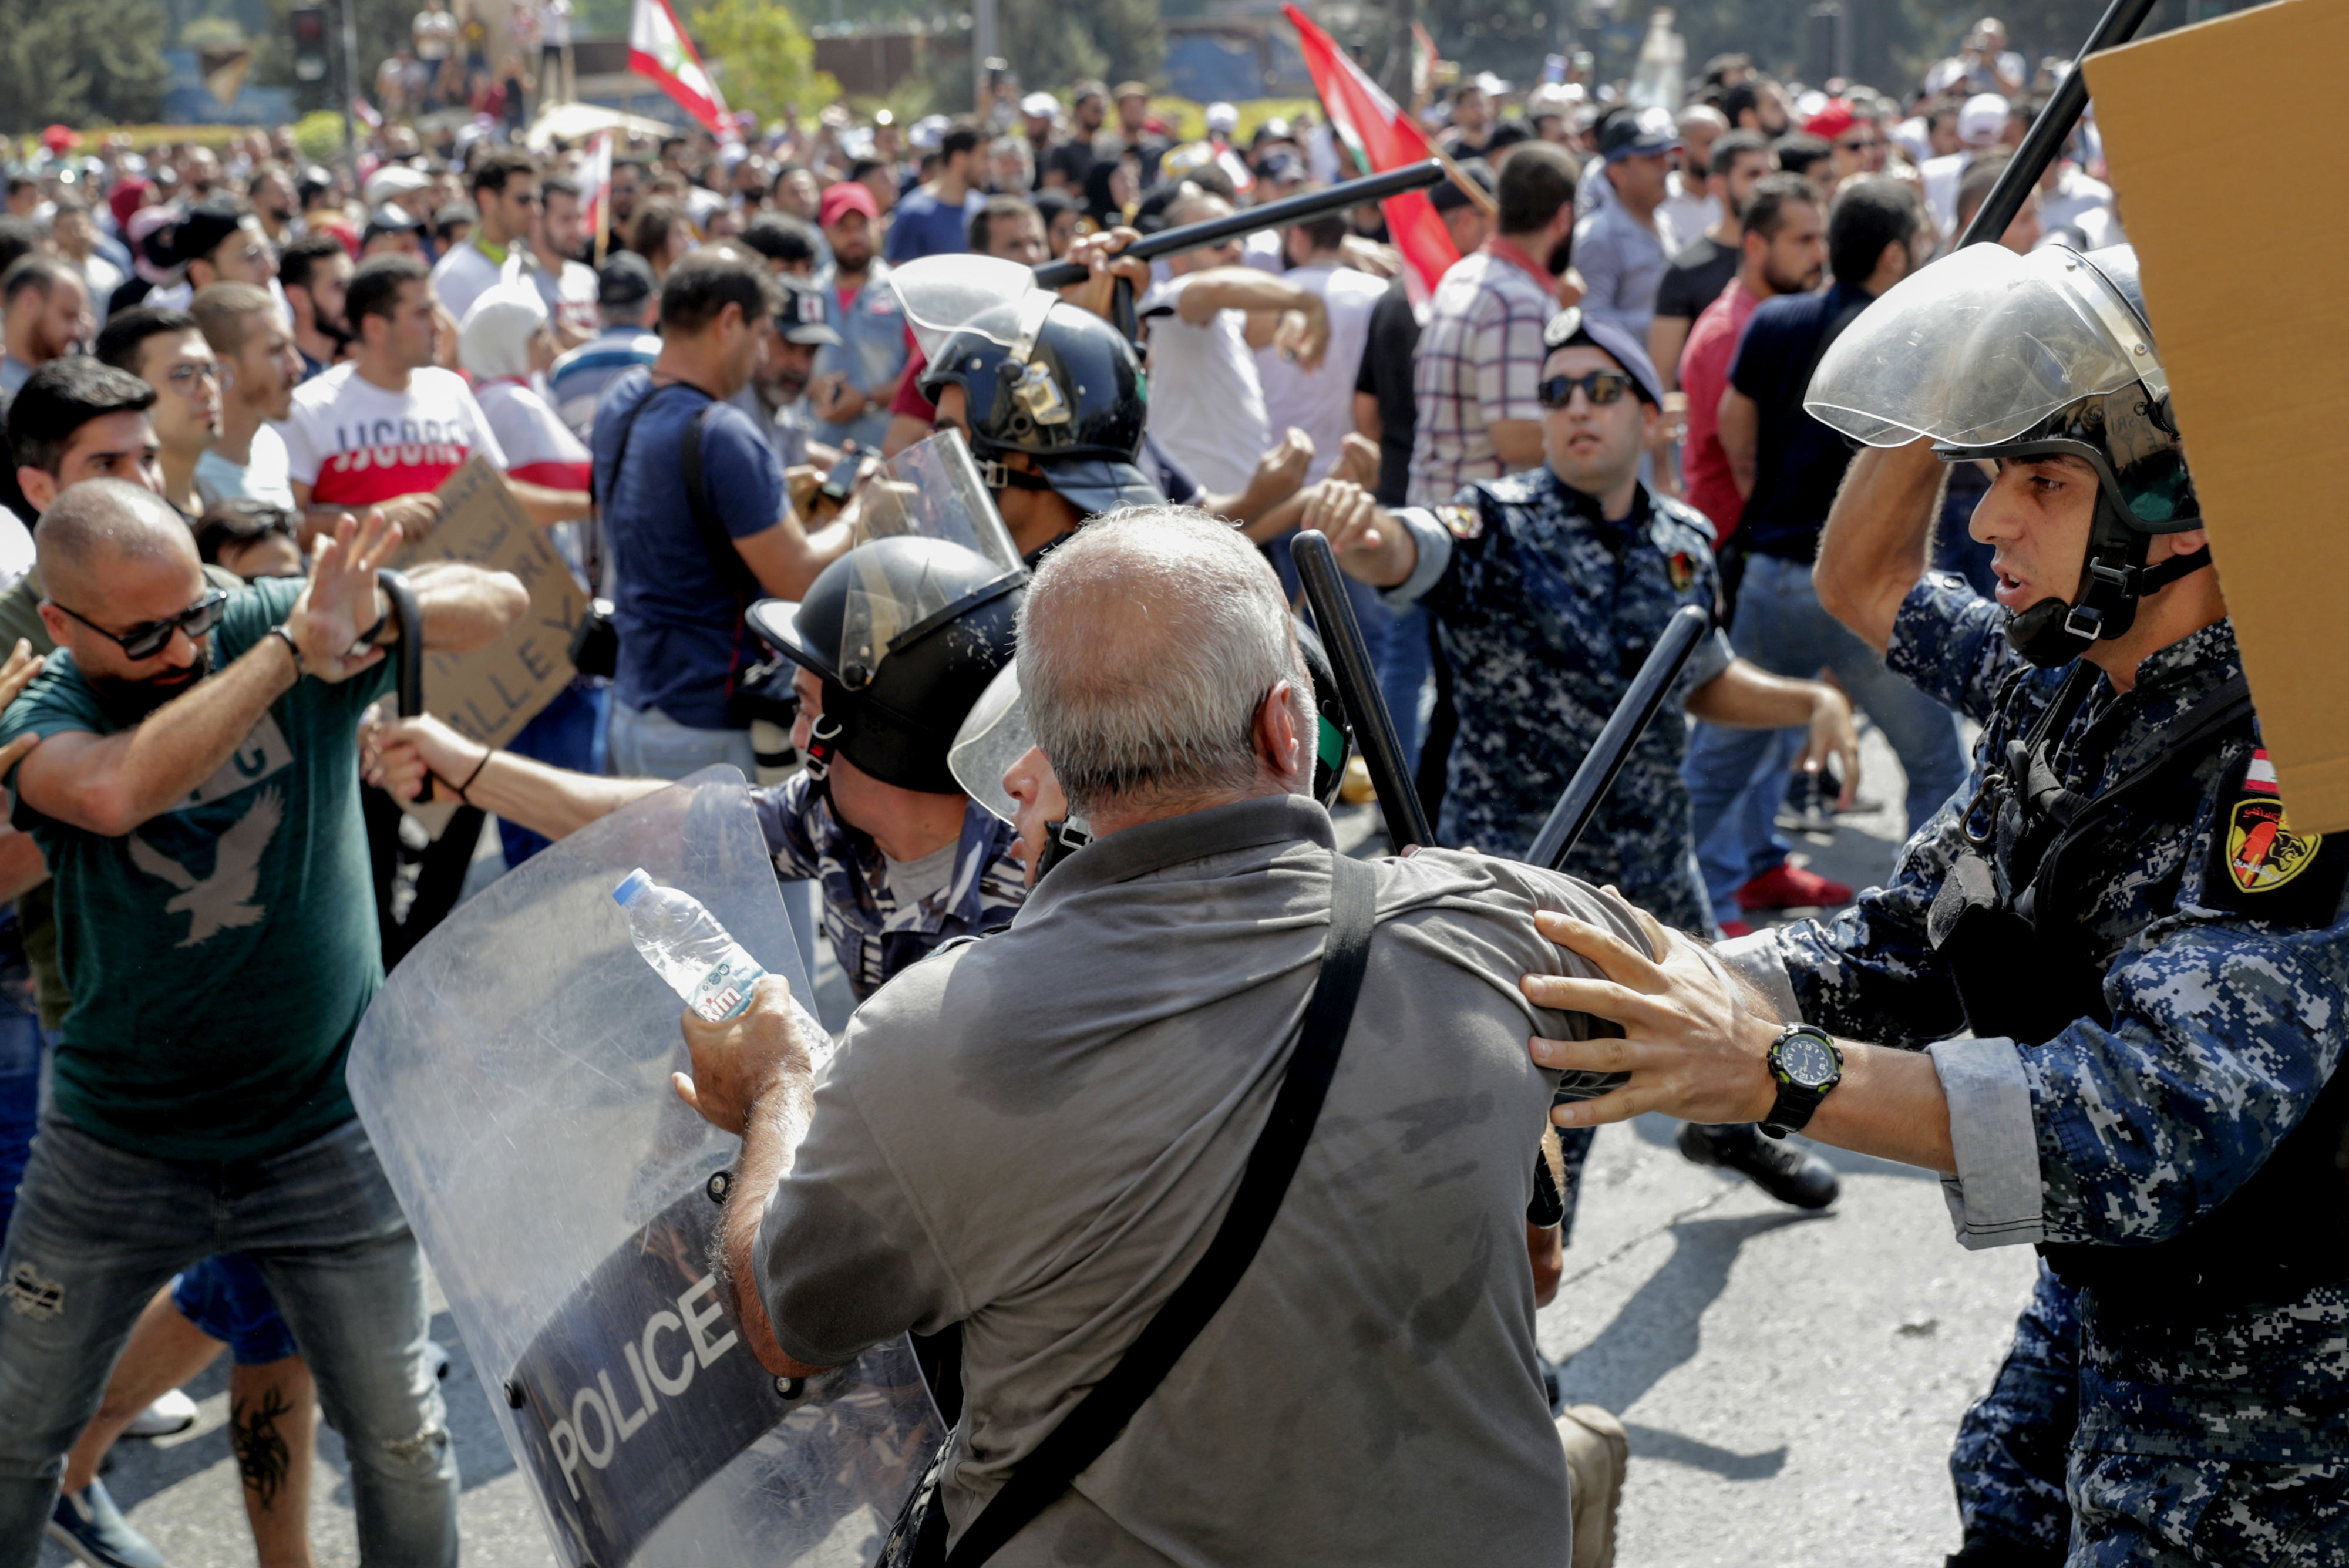 Lebanese protesters clash with riot policemen as they try to break through security barriers in front of the cabinet office during a demonstration in central Beirut's Martyr Square (AFP)